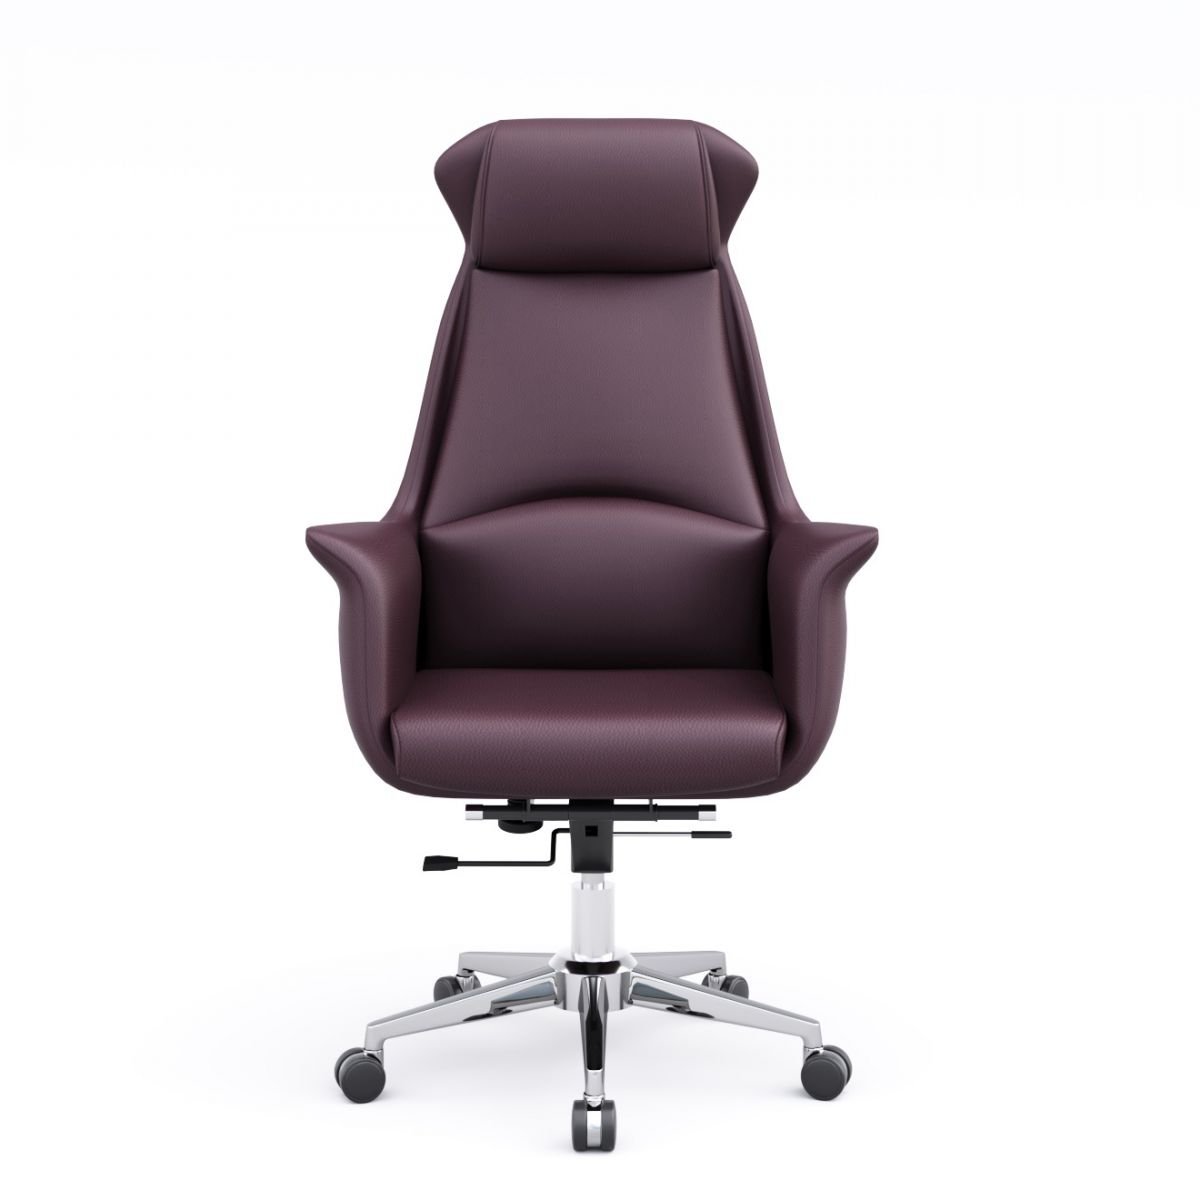 Ergonomic Sepia Rawhide Office Furniture with Tilt Available, Headrest, Swivel Wheels, and Armrest, Grey/ Coffee, Genuine Leather